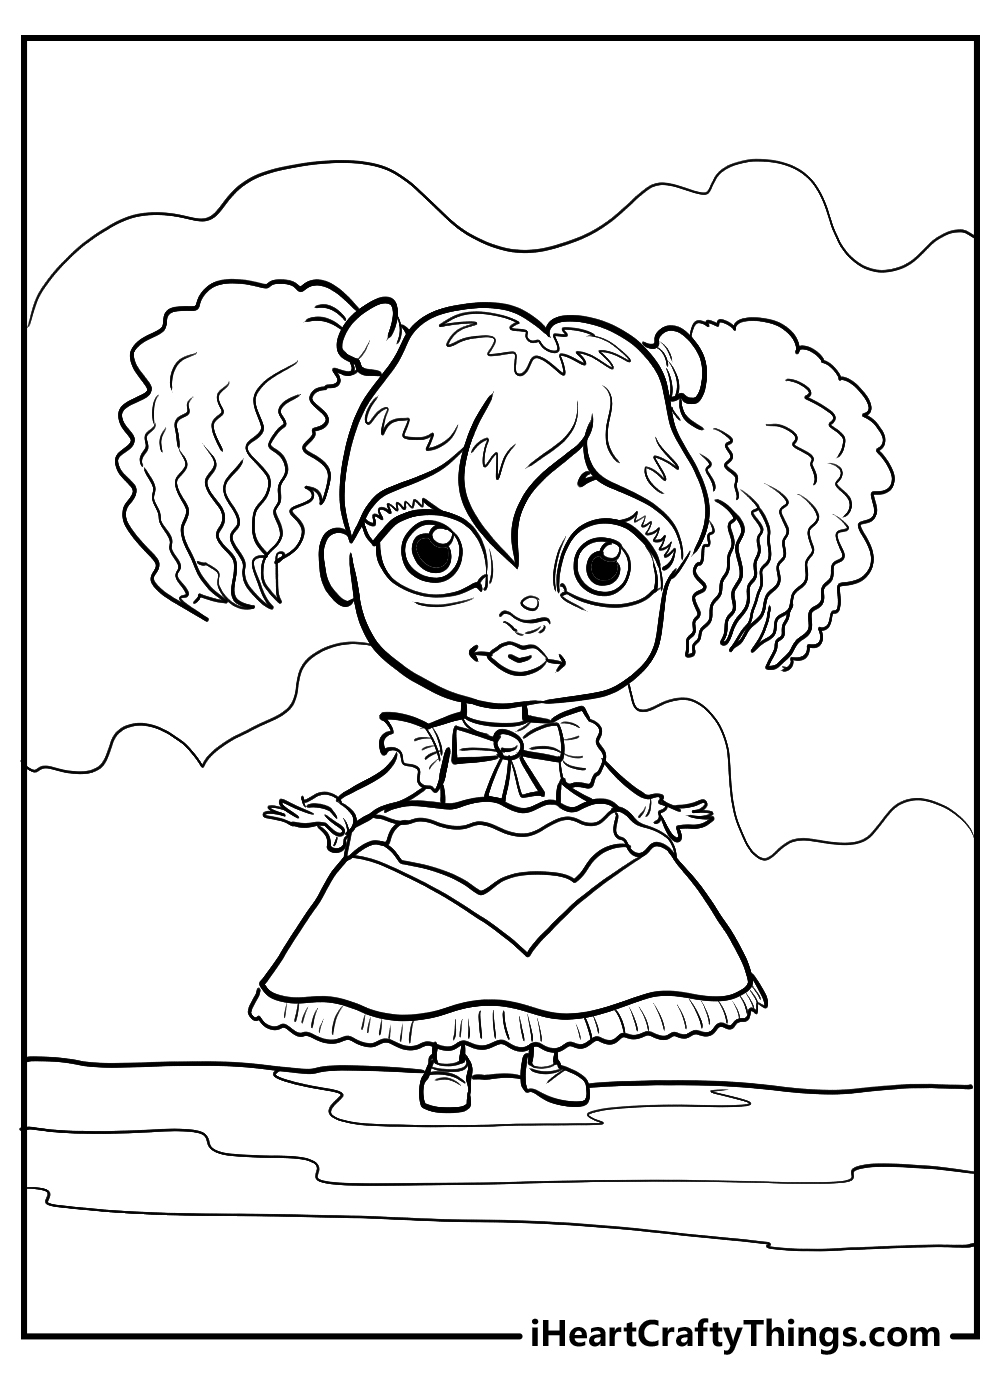 Poppy Playtime coloring pages, Free coloring pages